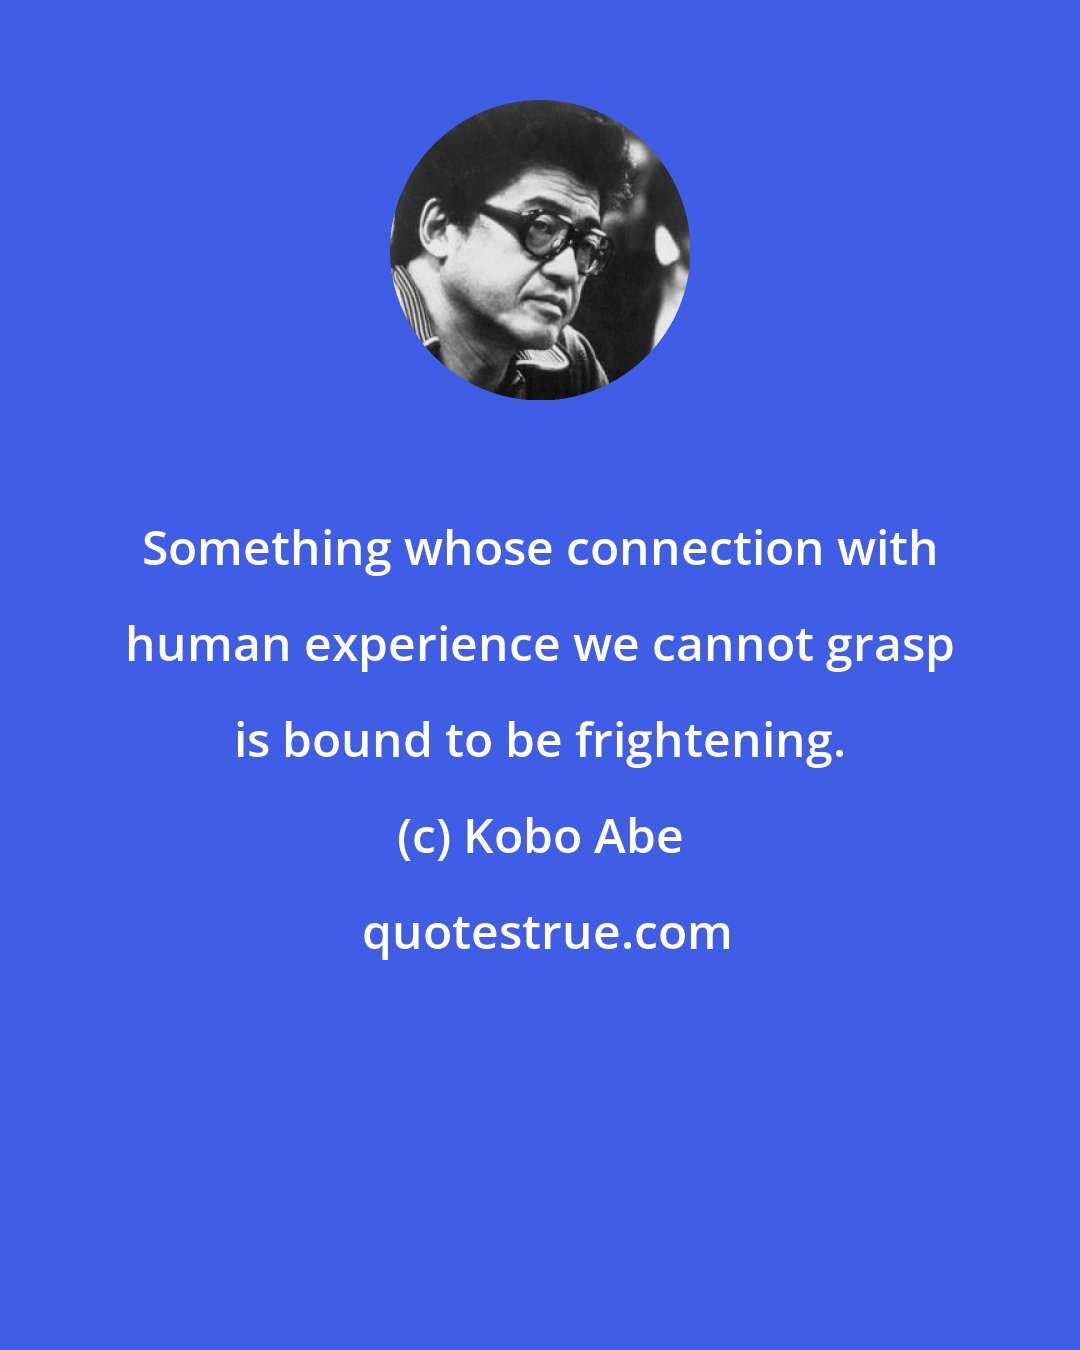 Kobo Abe: Something whose connection with human experience we cannot grasp is bound to be frightening.